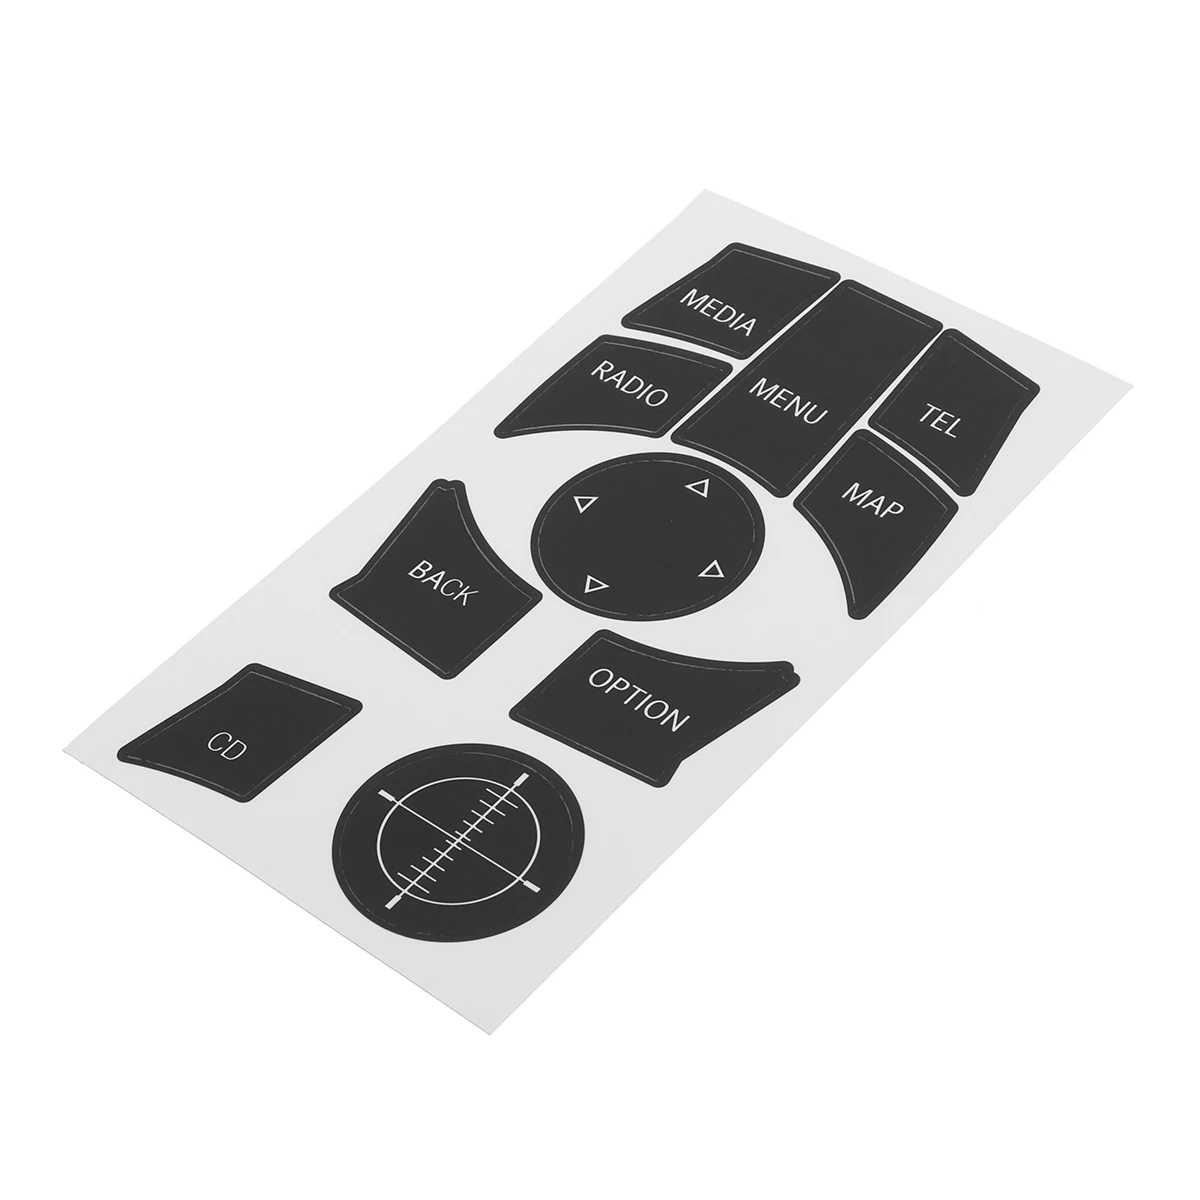 Decal Repair Kit Compatible with BMW iDrive Console Buttons Easy to Apply Repair Your Worn Faded Ugly Buttons 